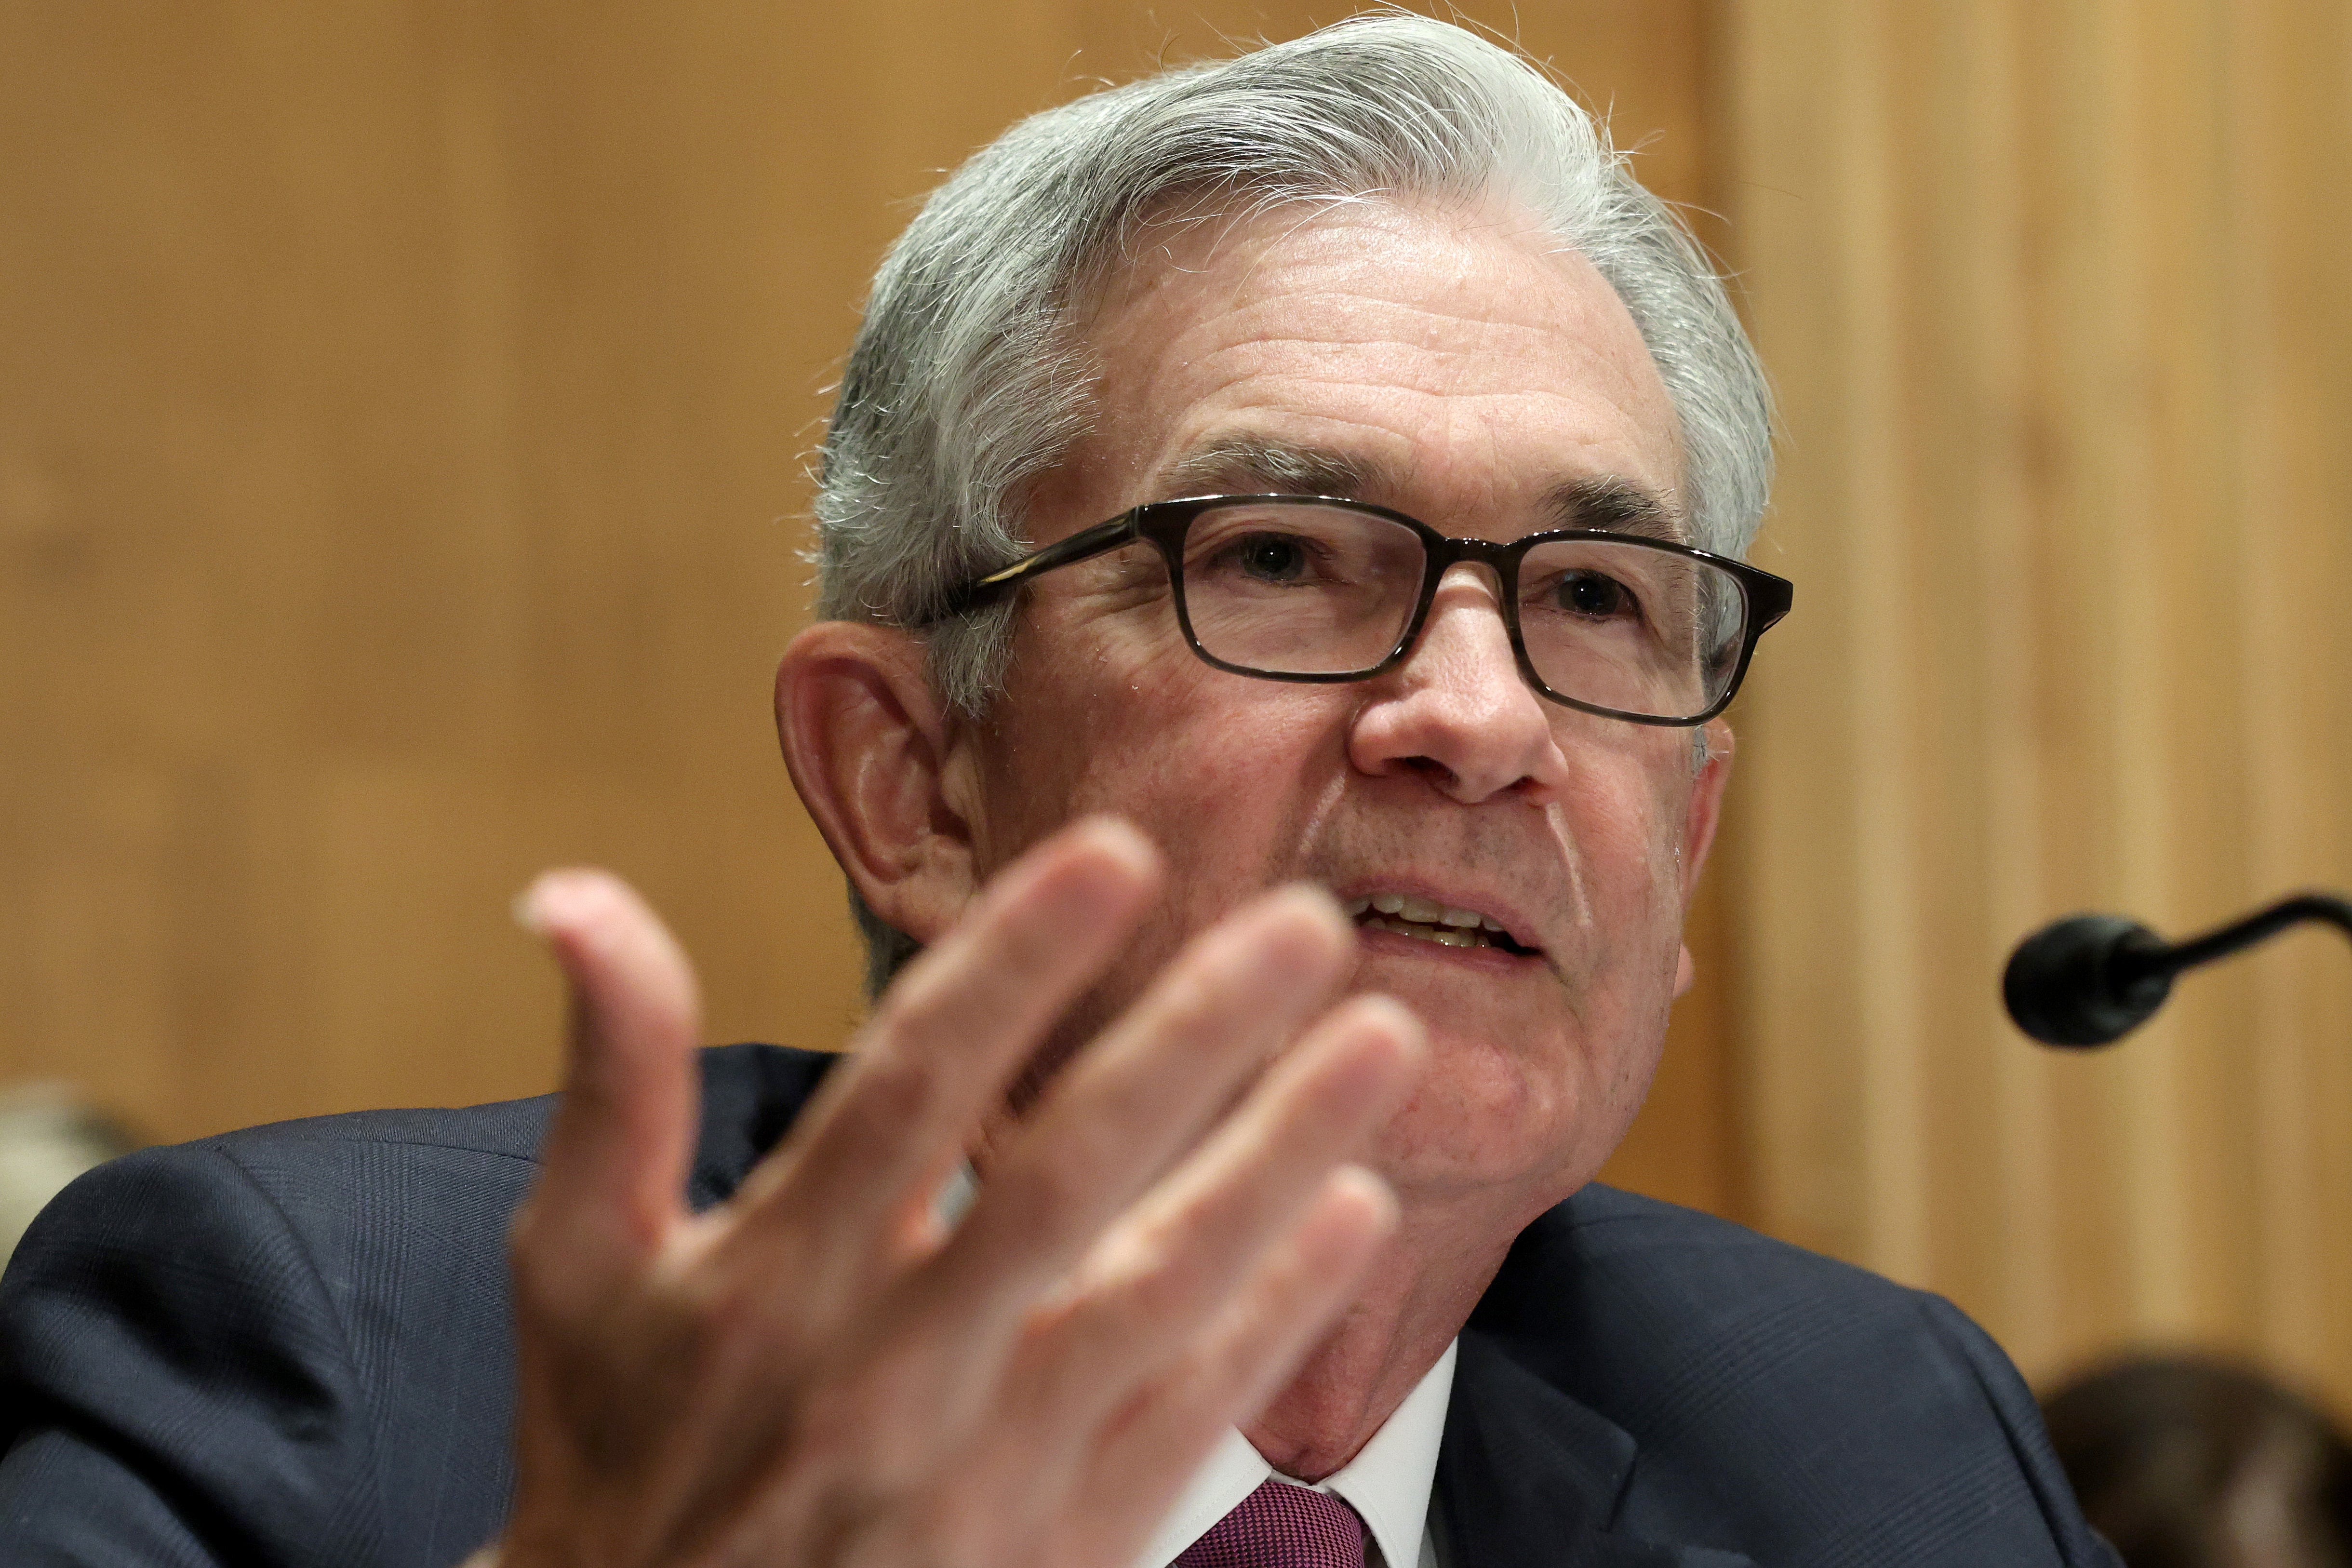 Federal Reserve Board Chairman Jerome Powell said the US economy is still a good deal away from making “substantial further progress” toward the Fed’s dual mandates of stable prices and maximum employment